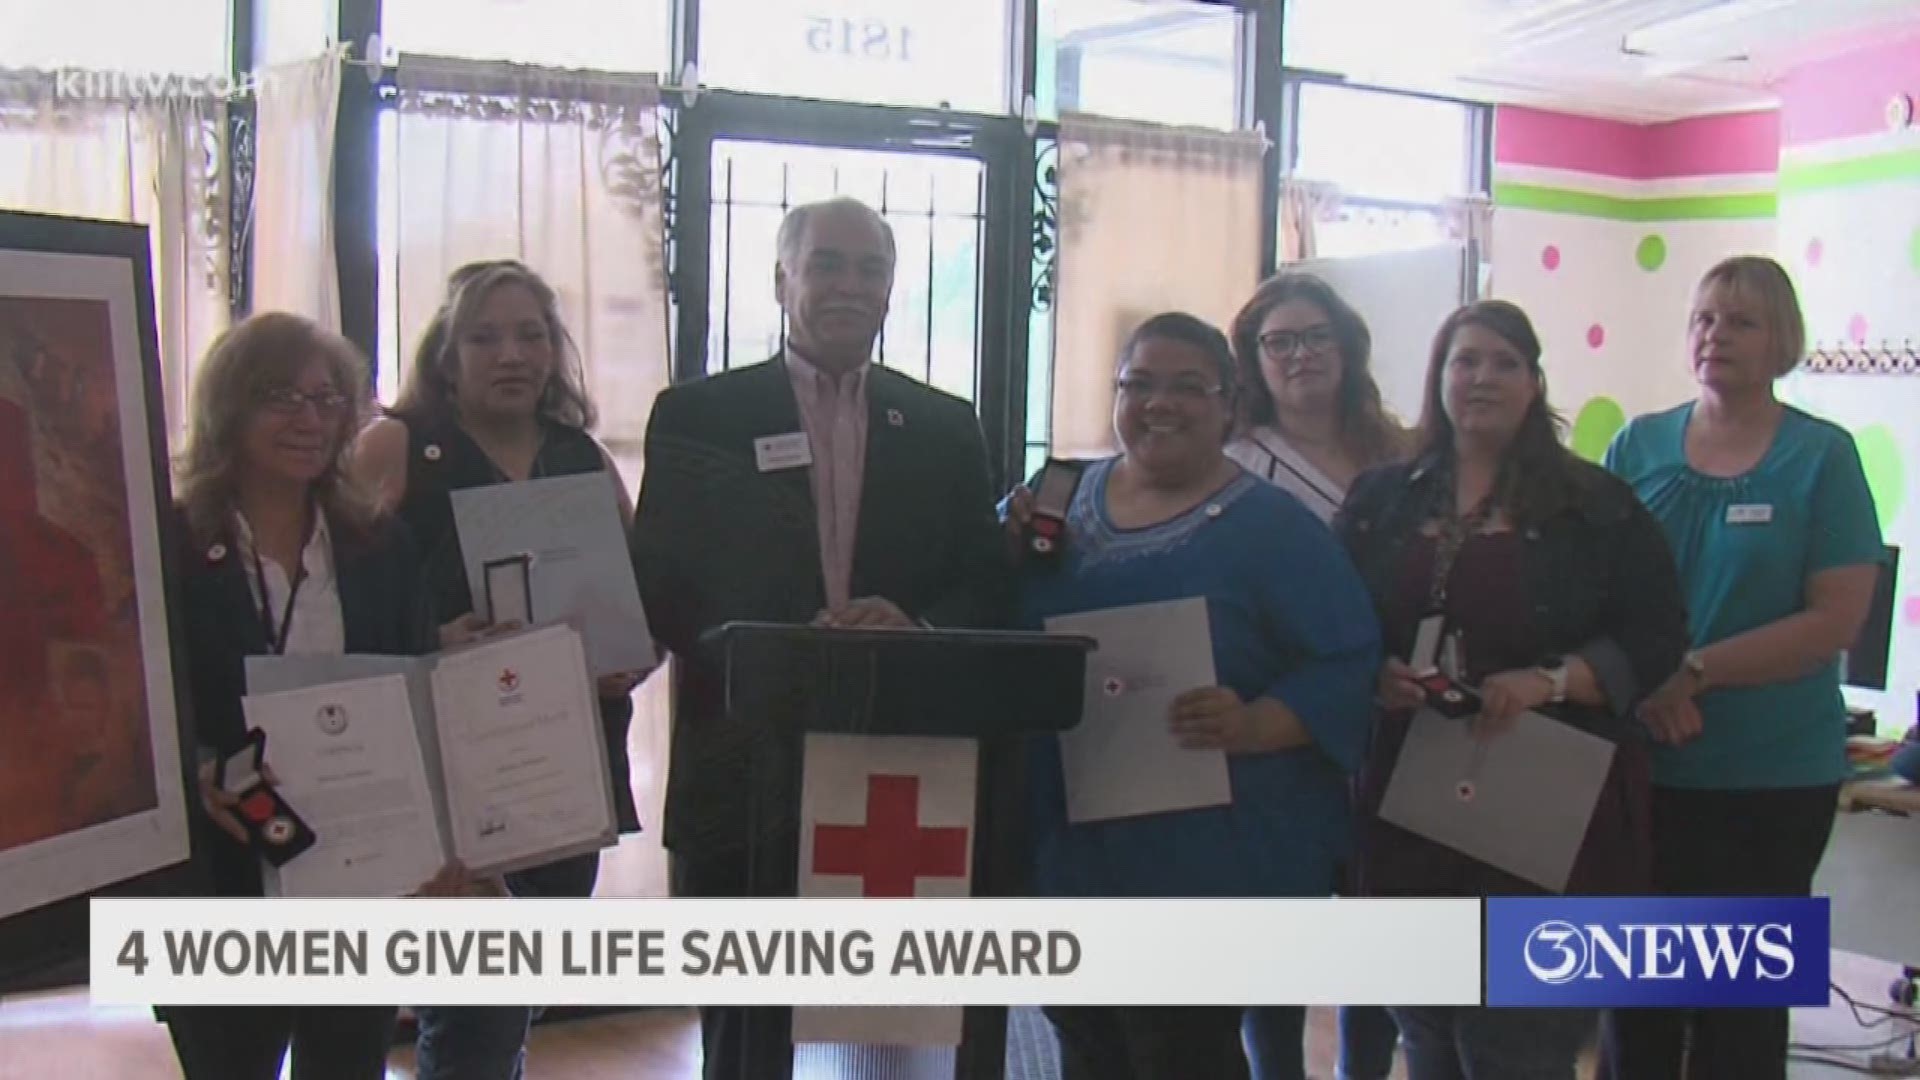 A group of ladies from Corpus Christi received special recognition Friday all because they went above and beyond in saving a man's life.